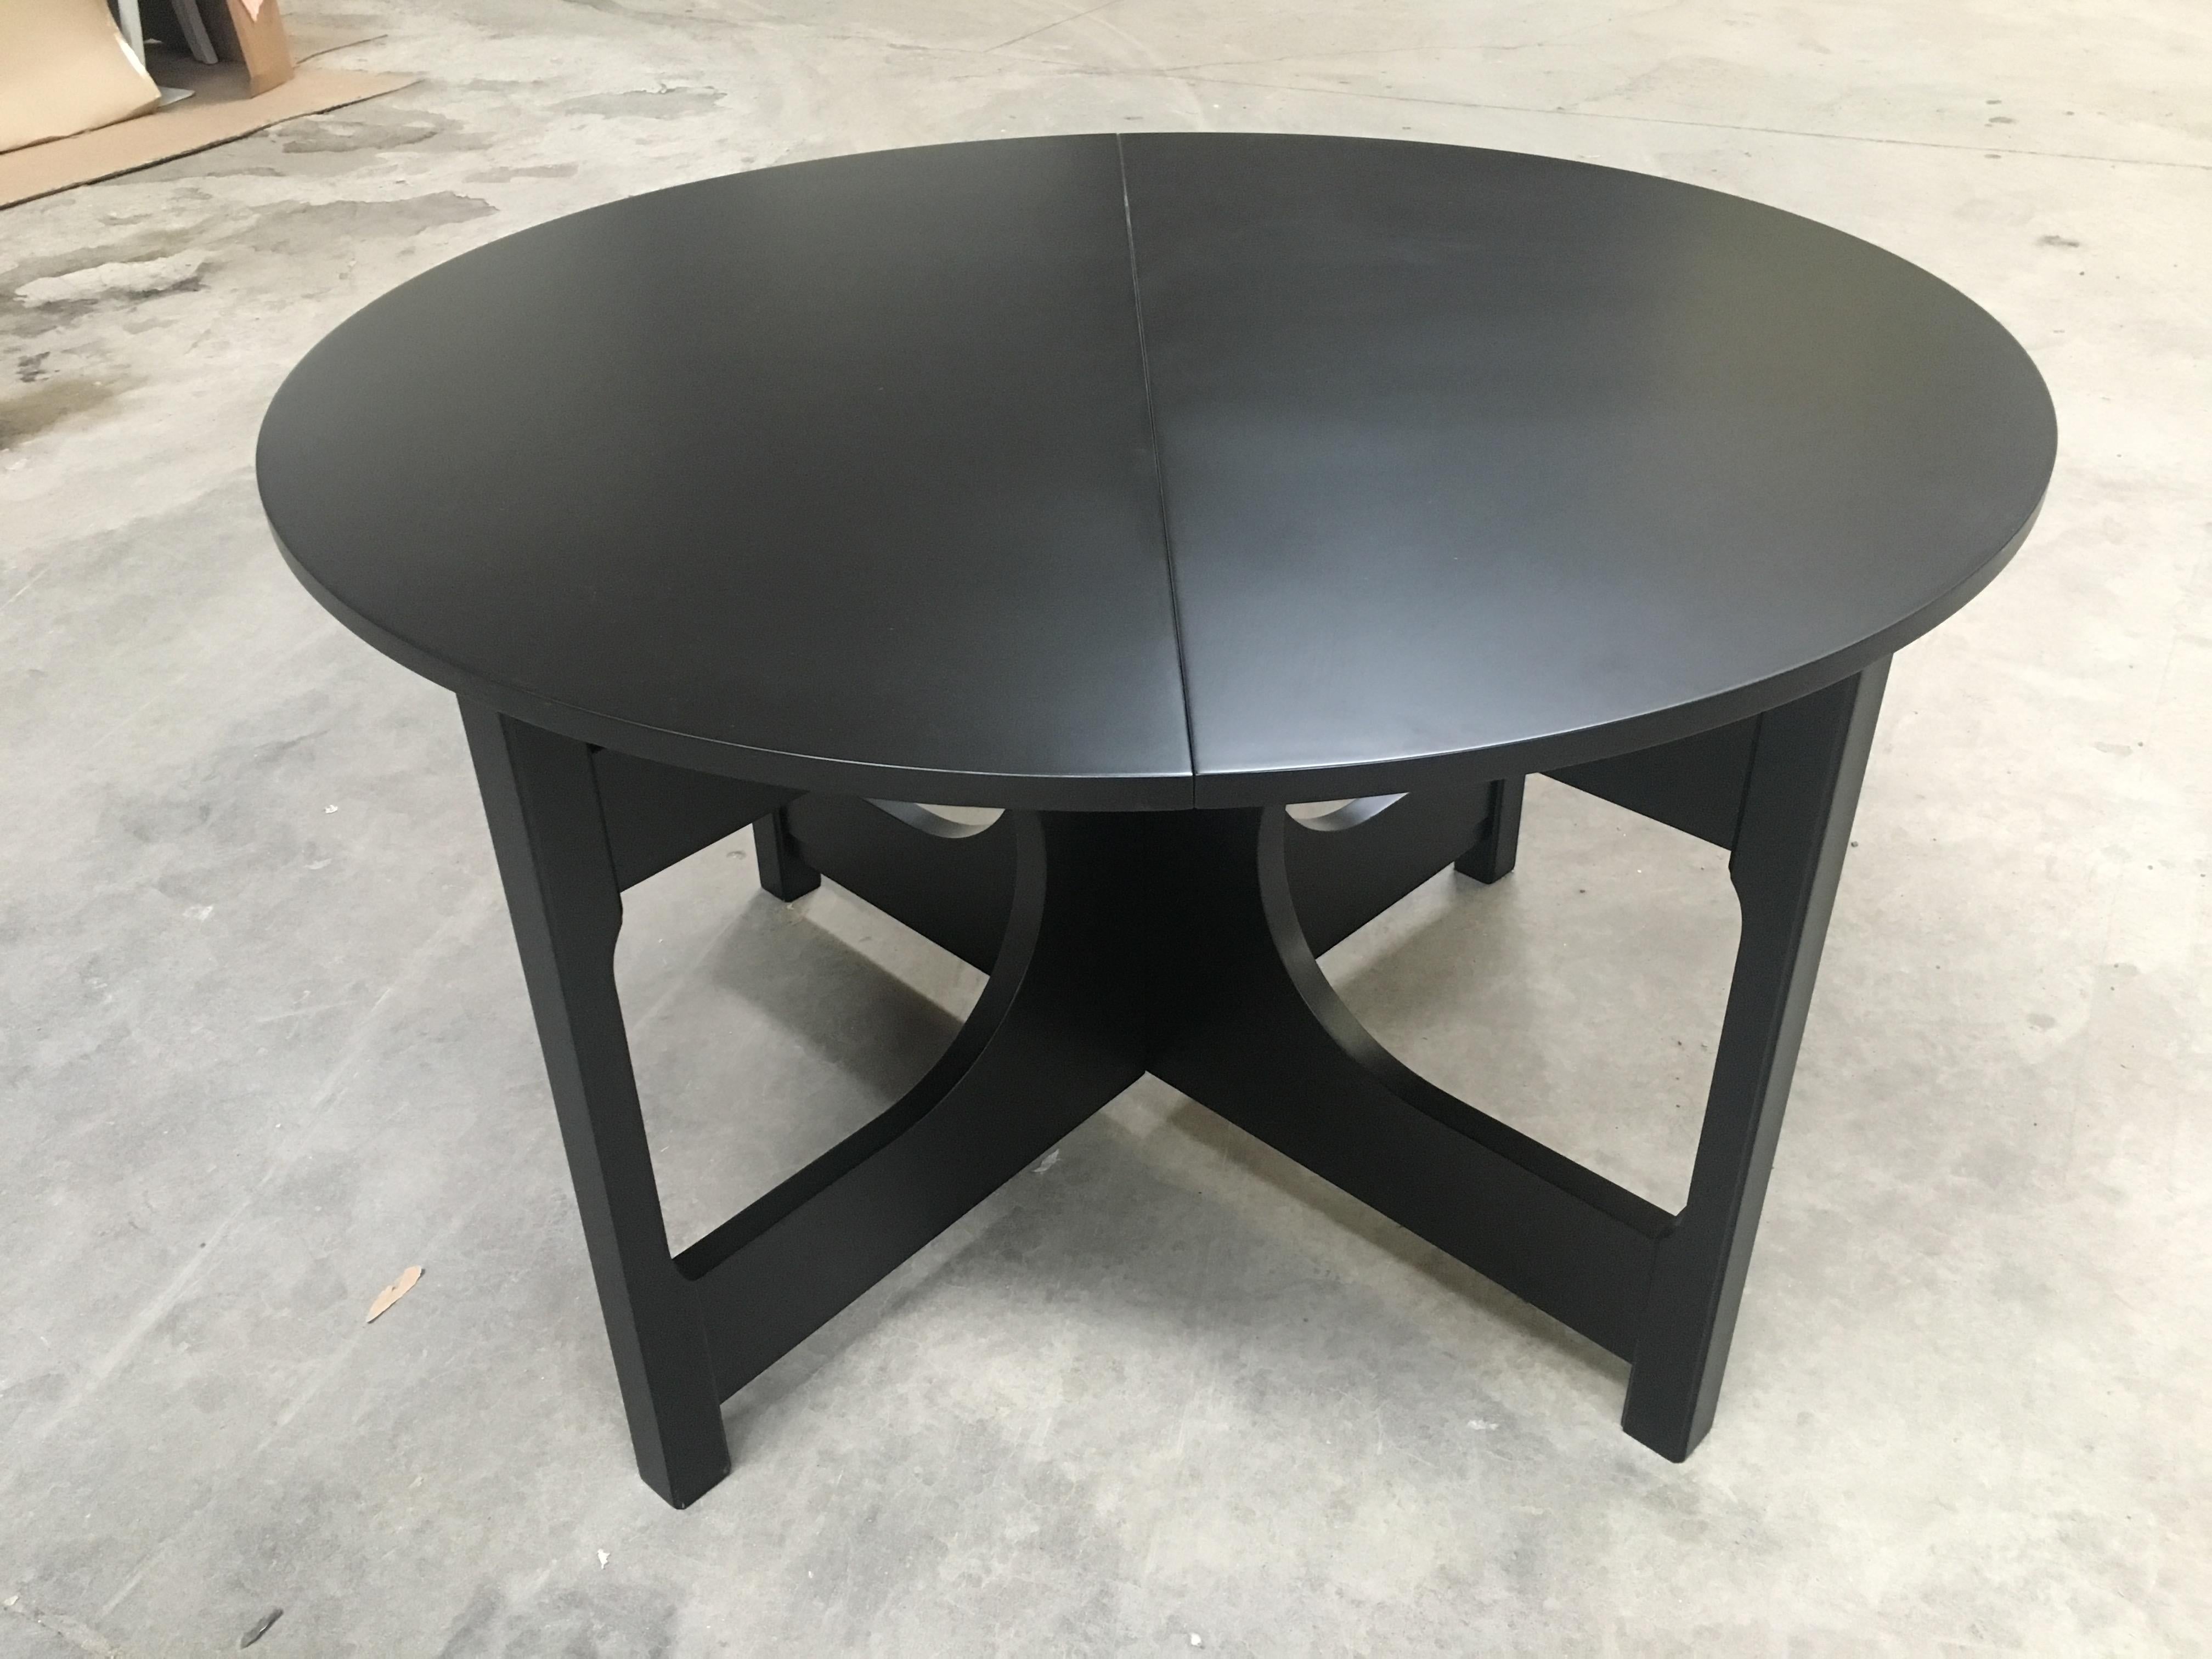 Mid-Century Modern Italian adjustable black lacquered wood dining table. 1970s
When closed the table measures cm.118 x 118 x H.74
When opened the table measures cm.118 x 158 x H.74.
 